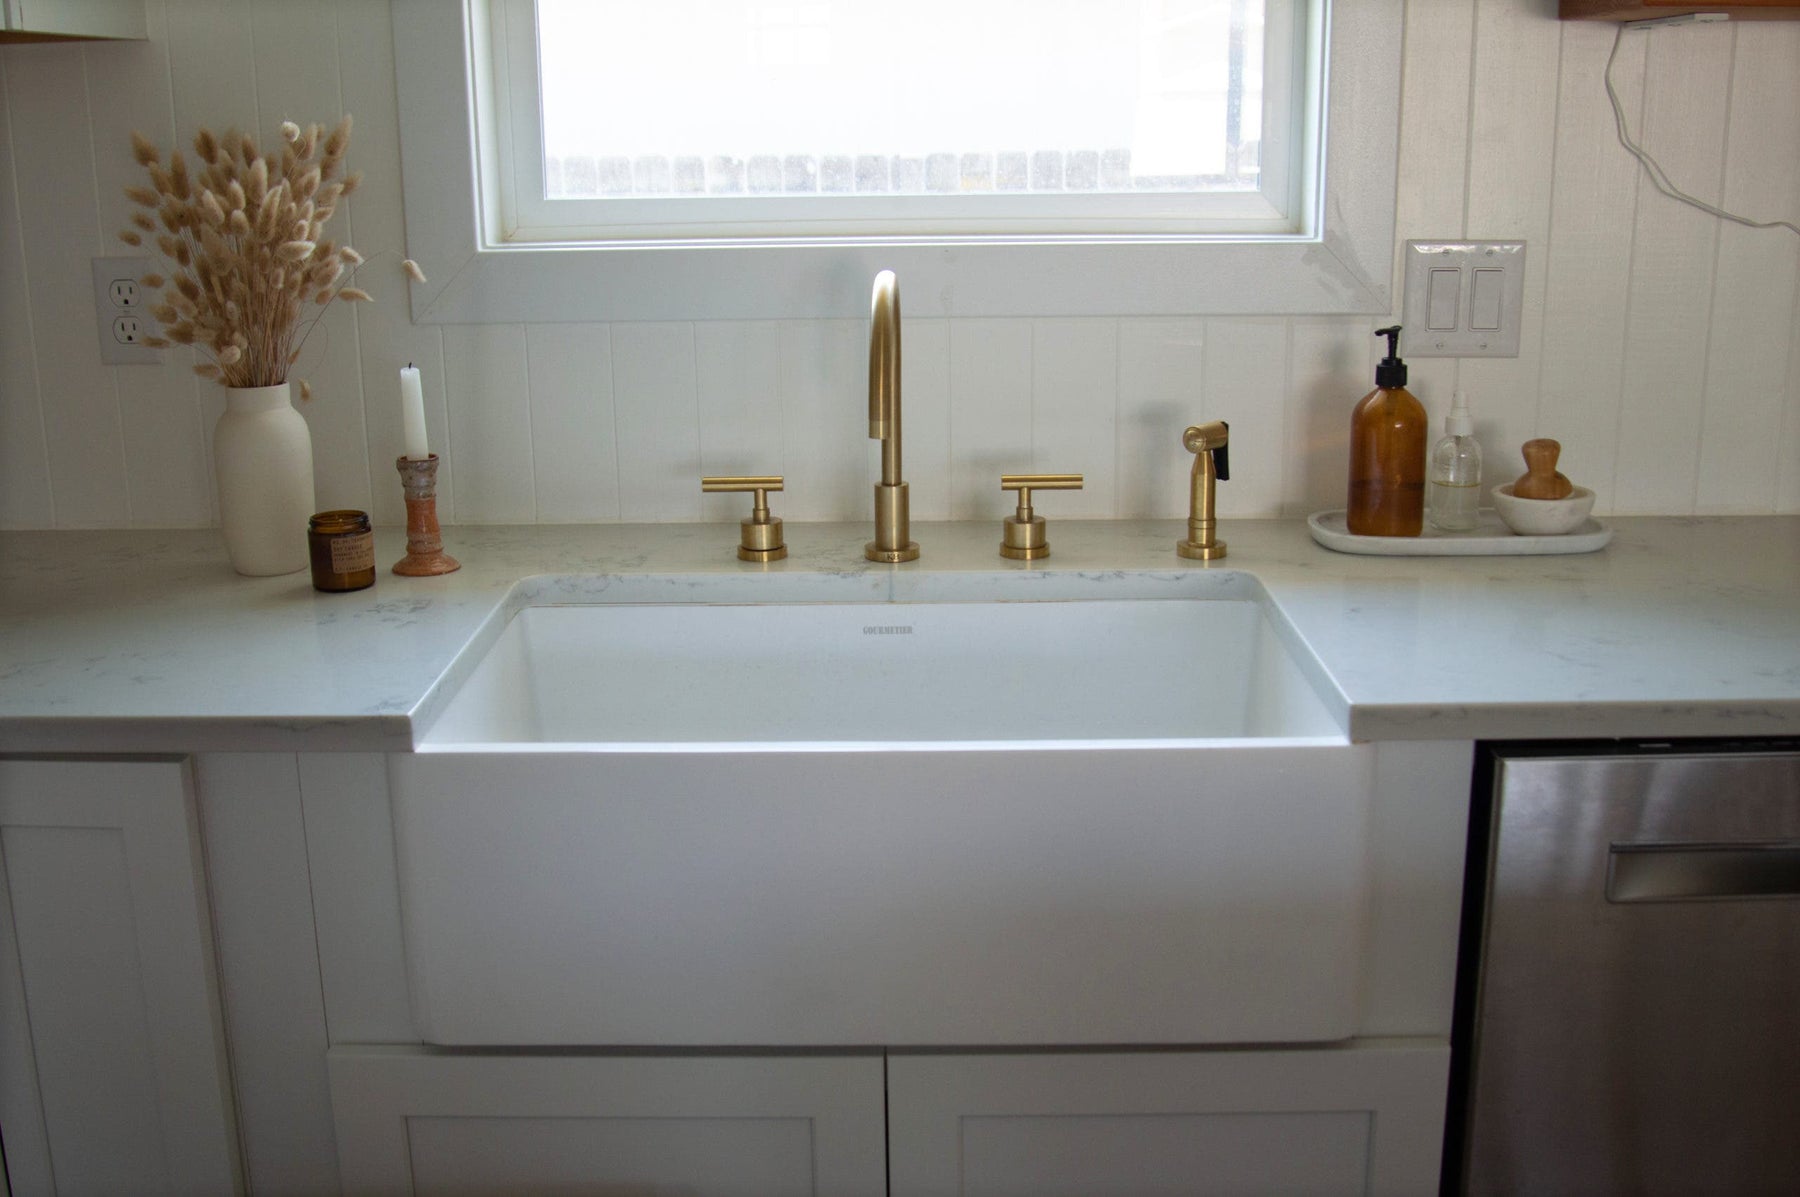 Everything You Should Know about Farmhouse Sinks